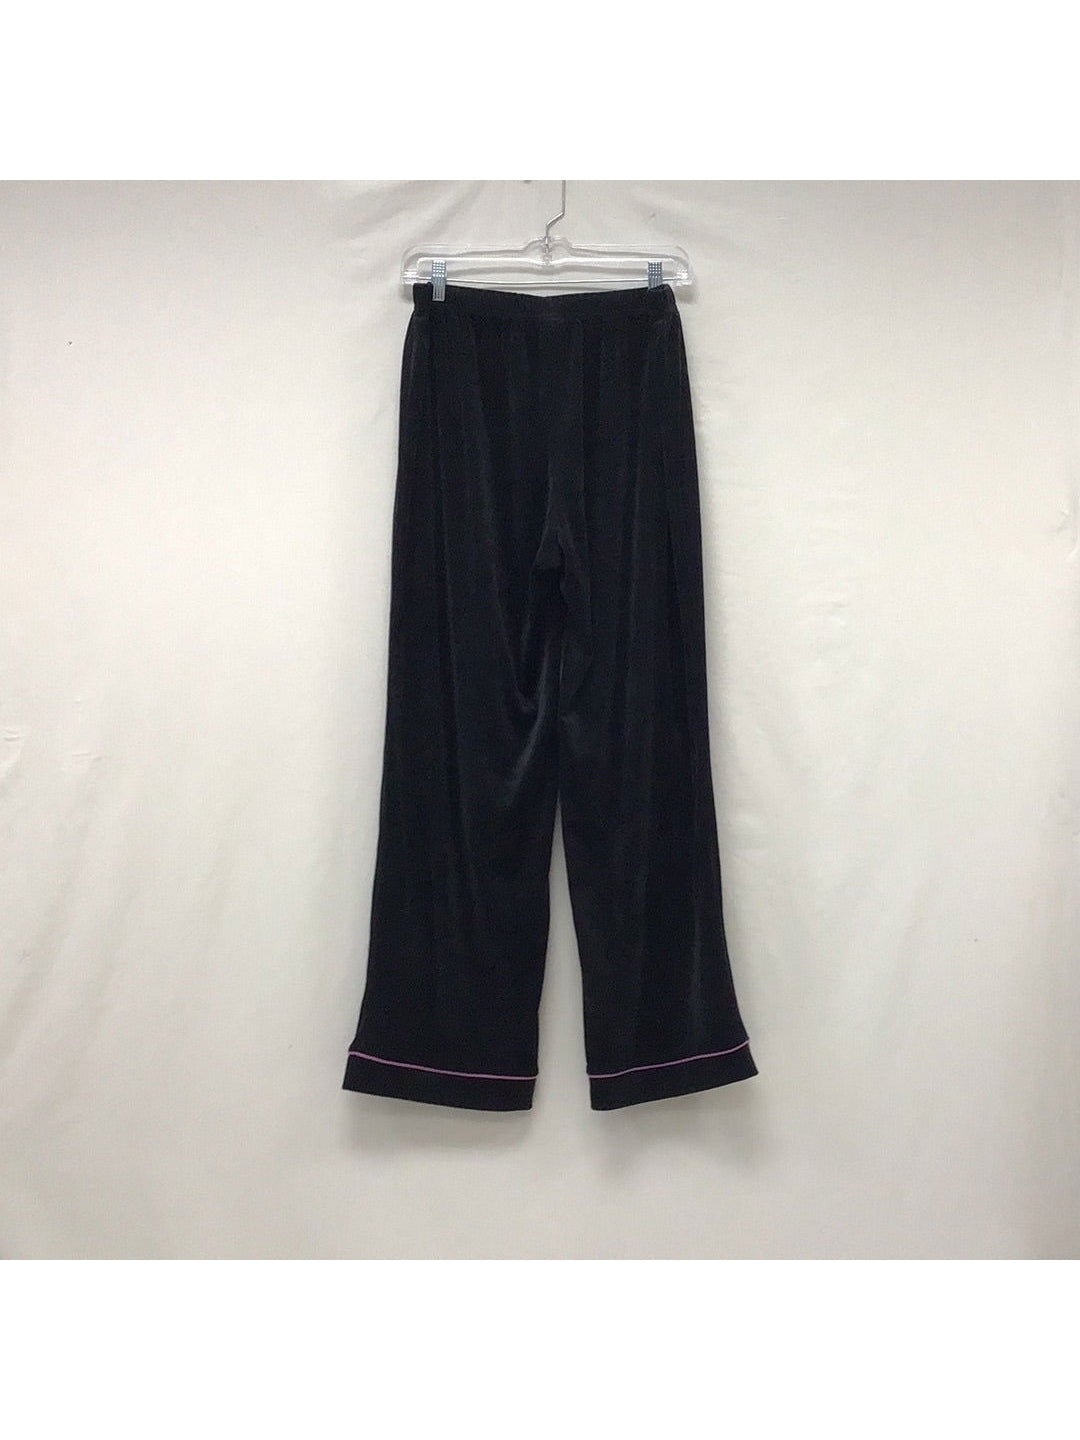 Juice Couture Ladies Large Black Sleepwear Pants - The Kennedy Collective Thrift - 